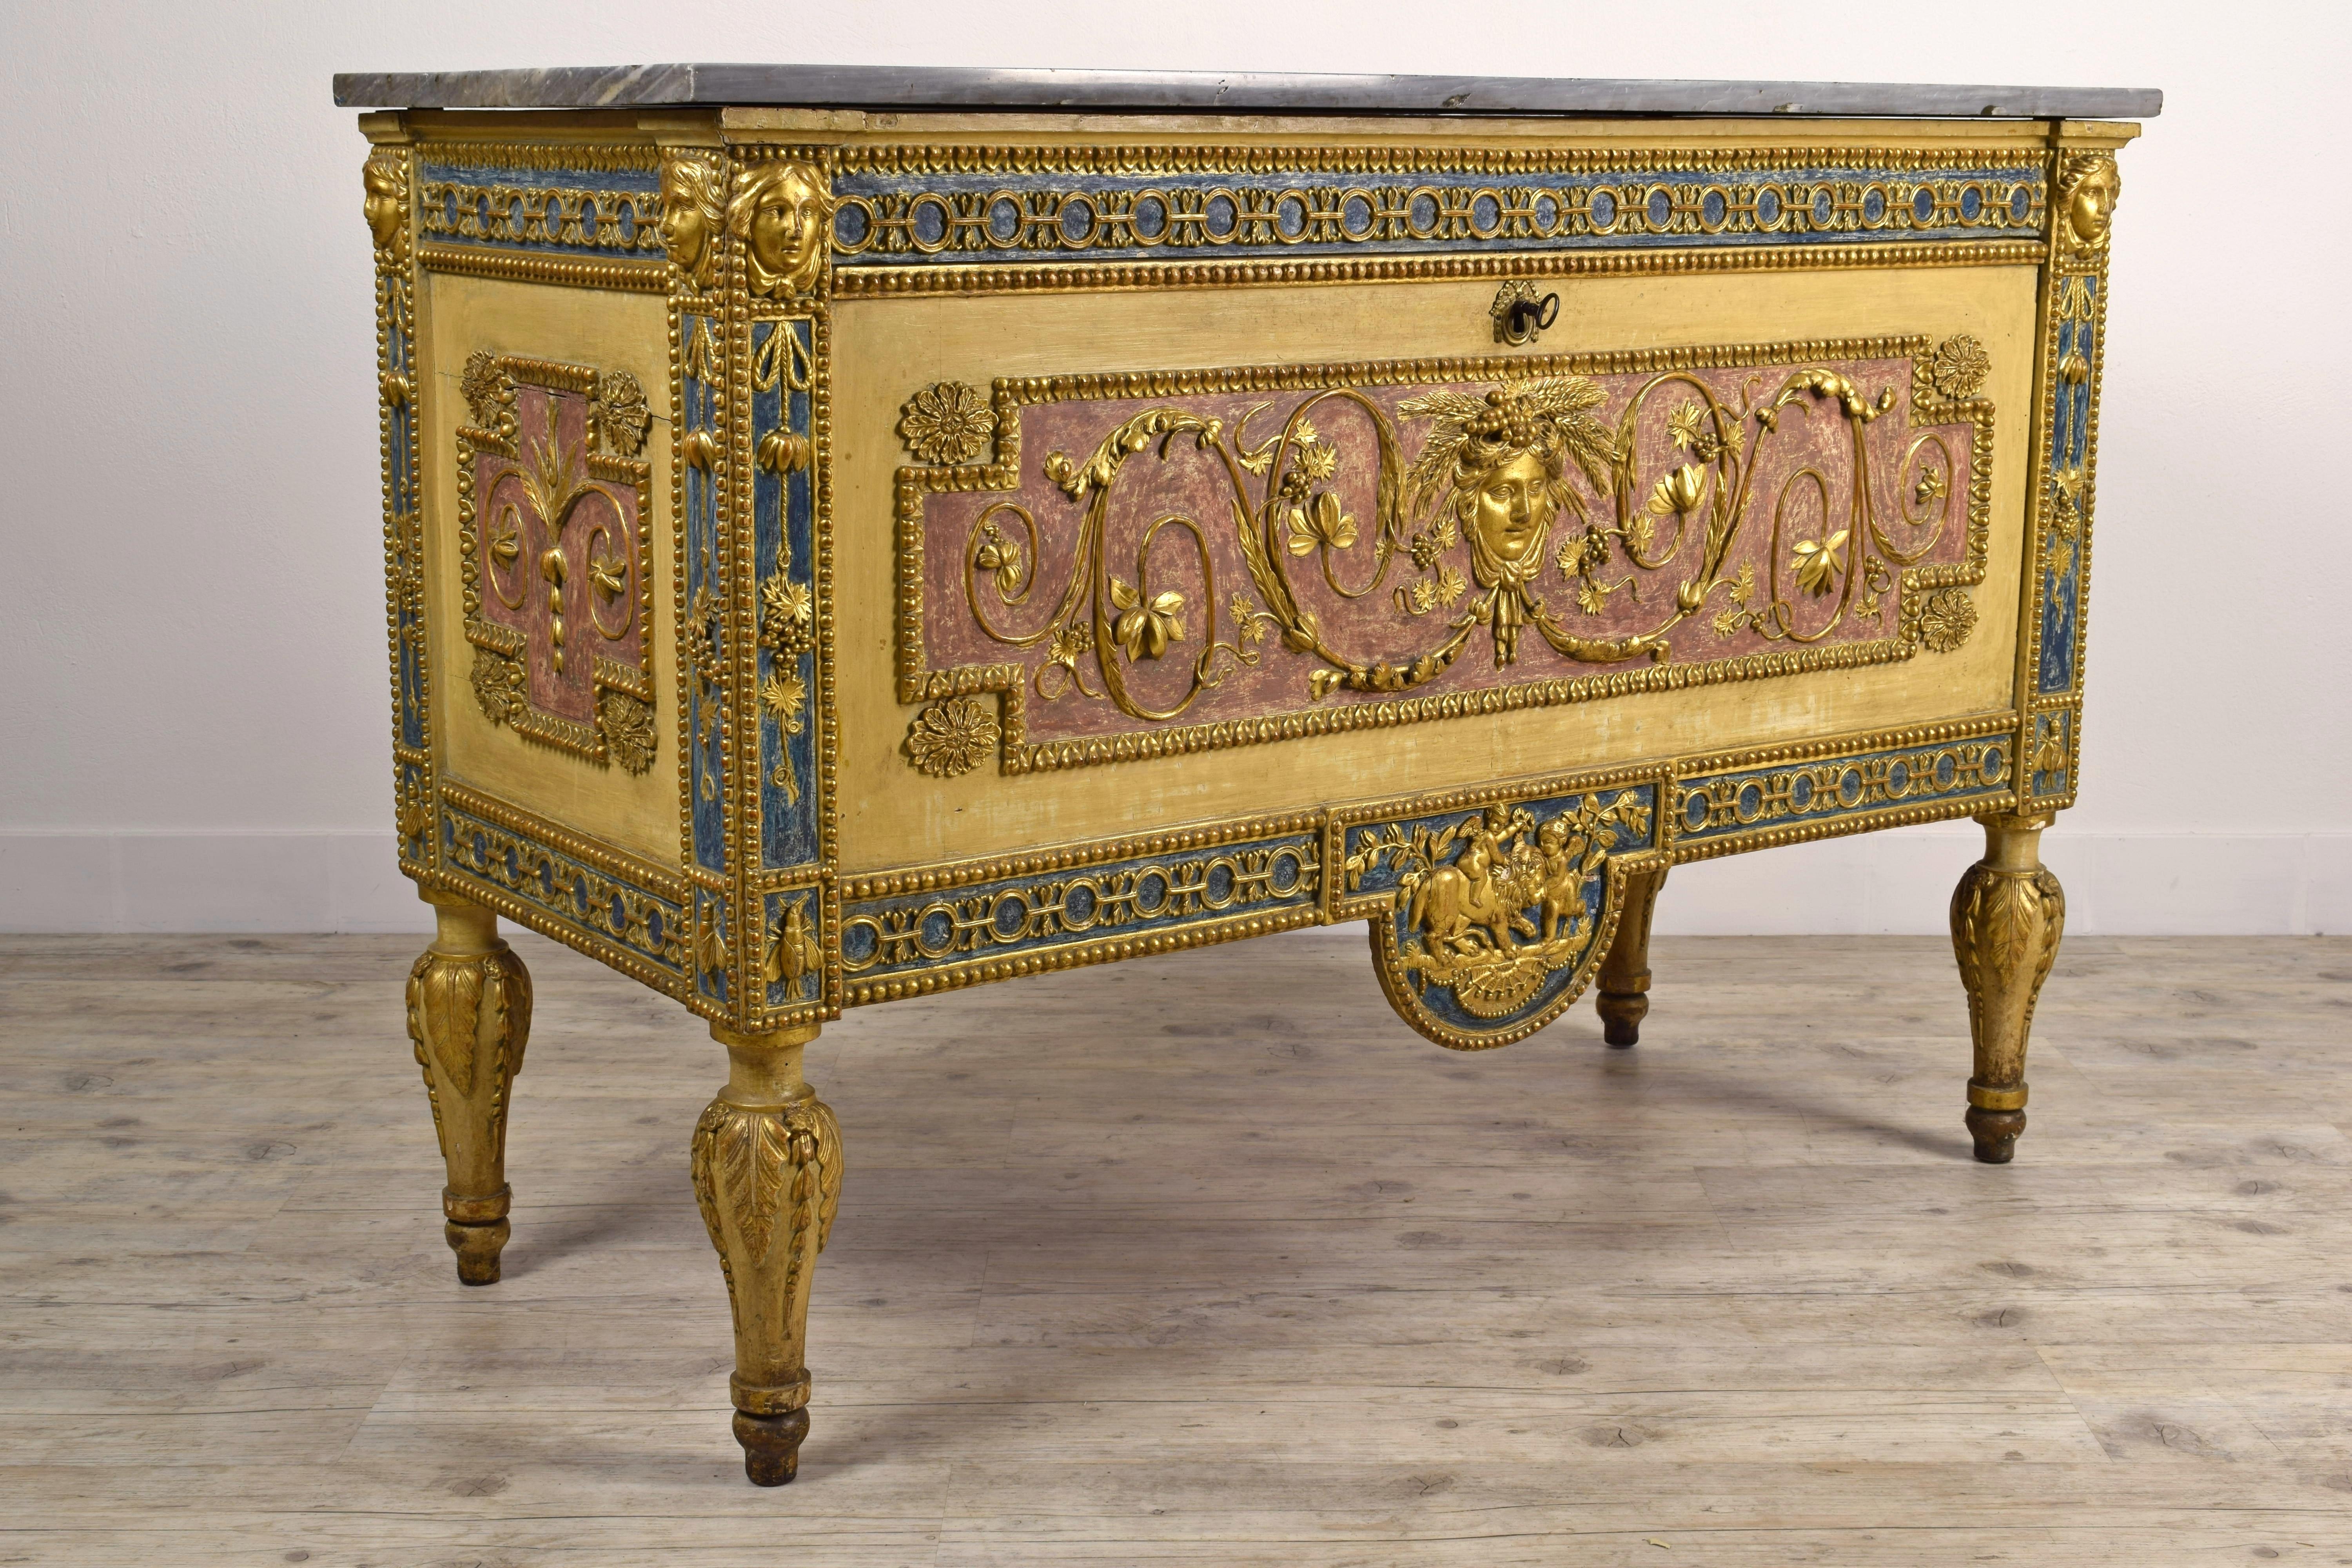 Hand-Carved 18th Century Italian Neoclassical Wood Dresser Attributed to Francesco Bolgiè For Sale